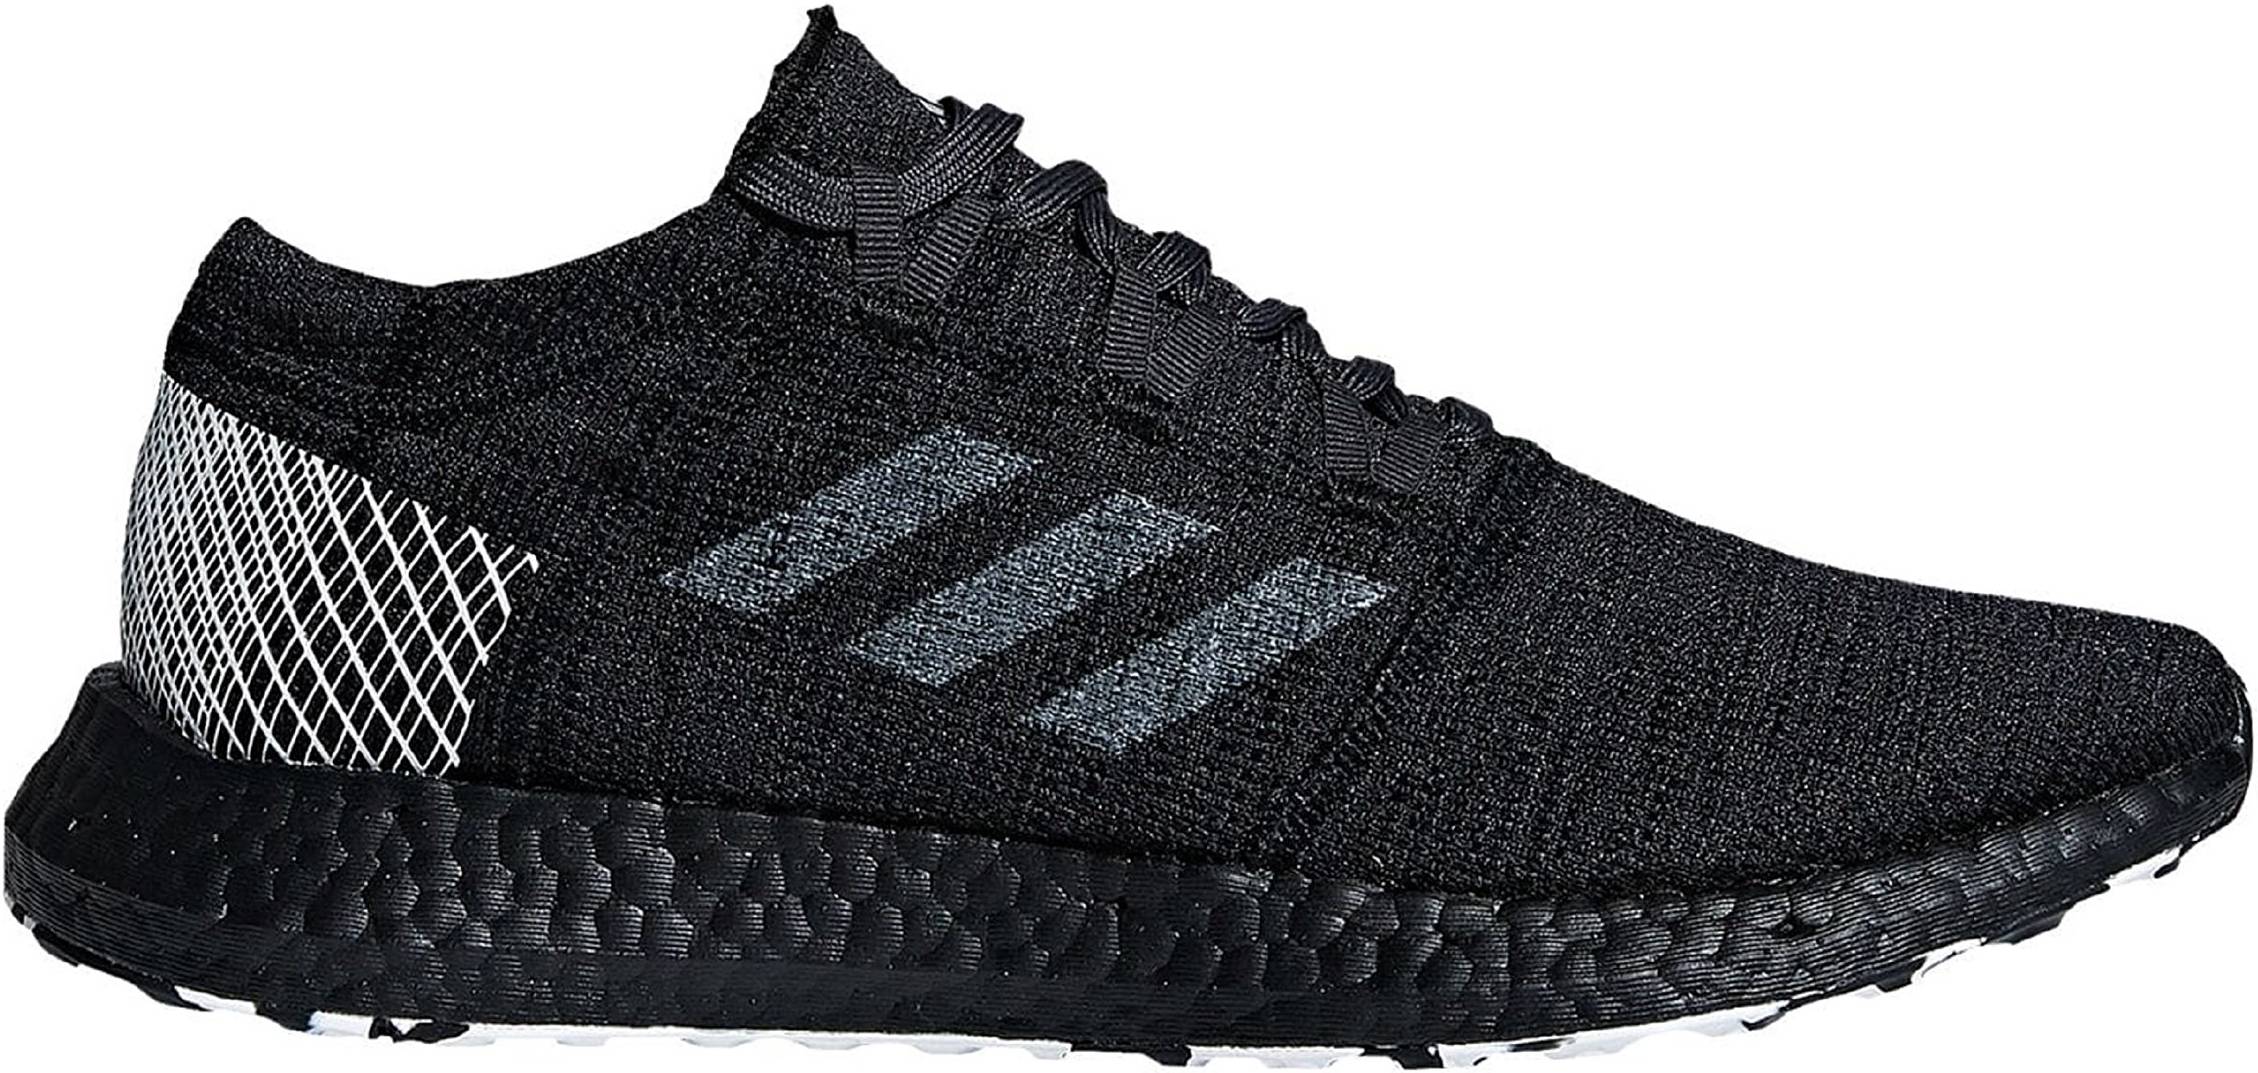 adidas pure boost go true to size